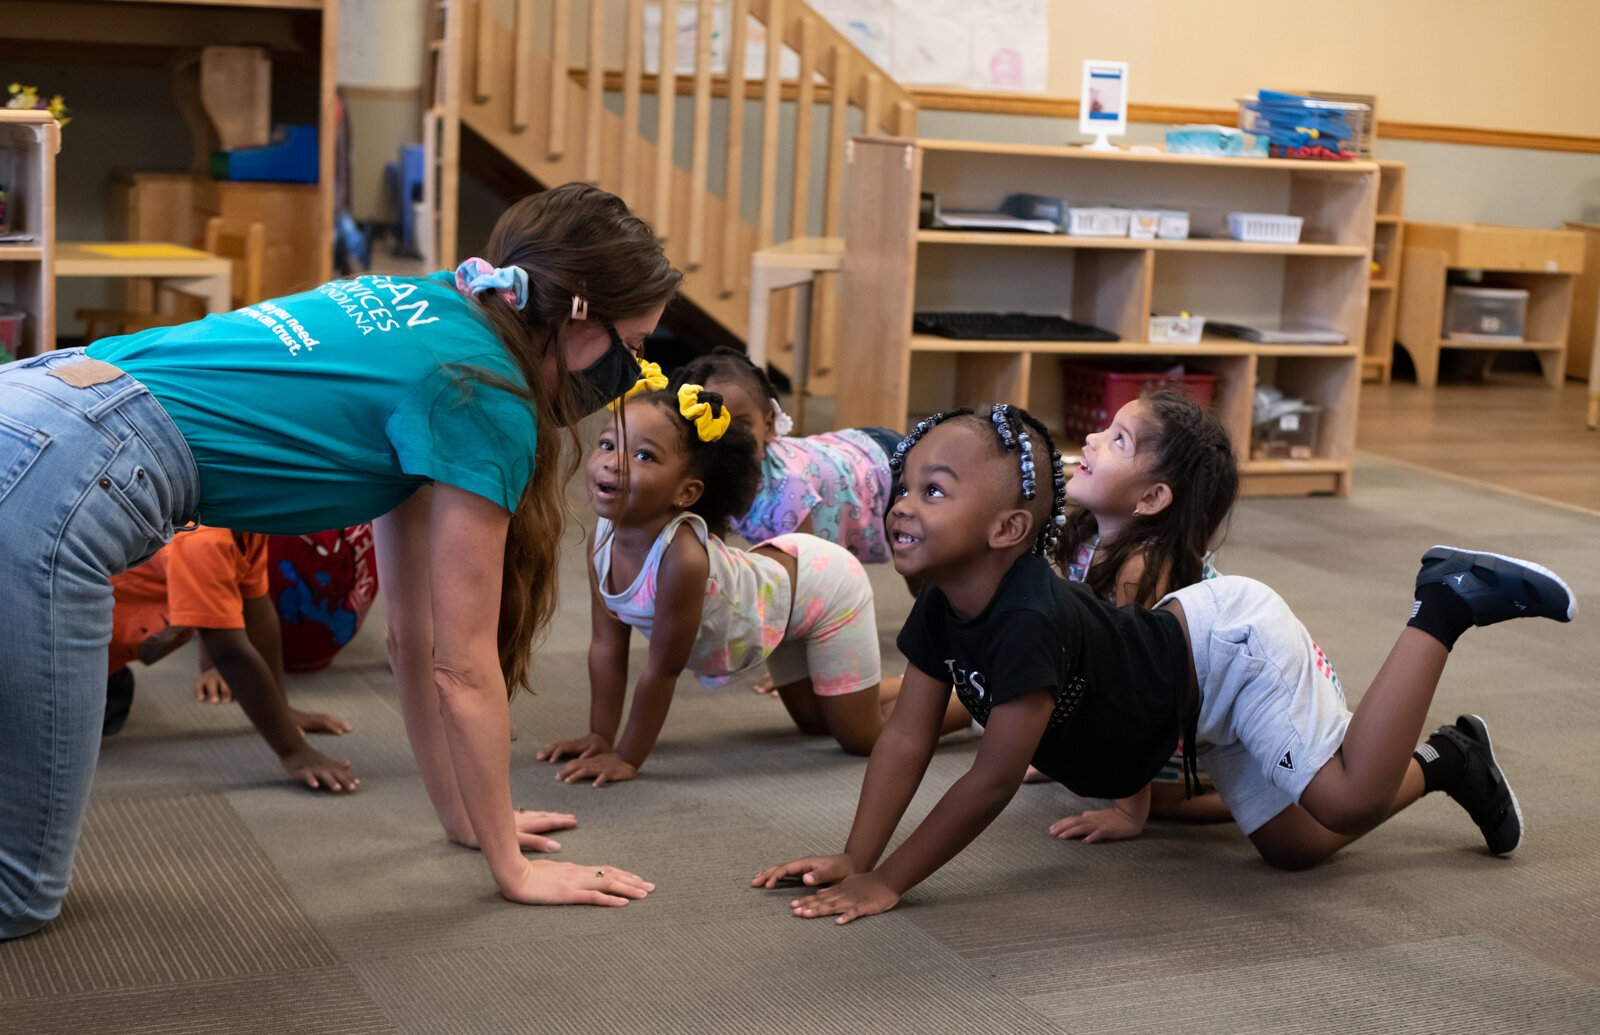 Miss Nielson stretches with children including Lelan, front, during her 3-5 year old class at Children's Village, 6613 S. Anthony.